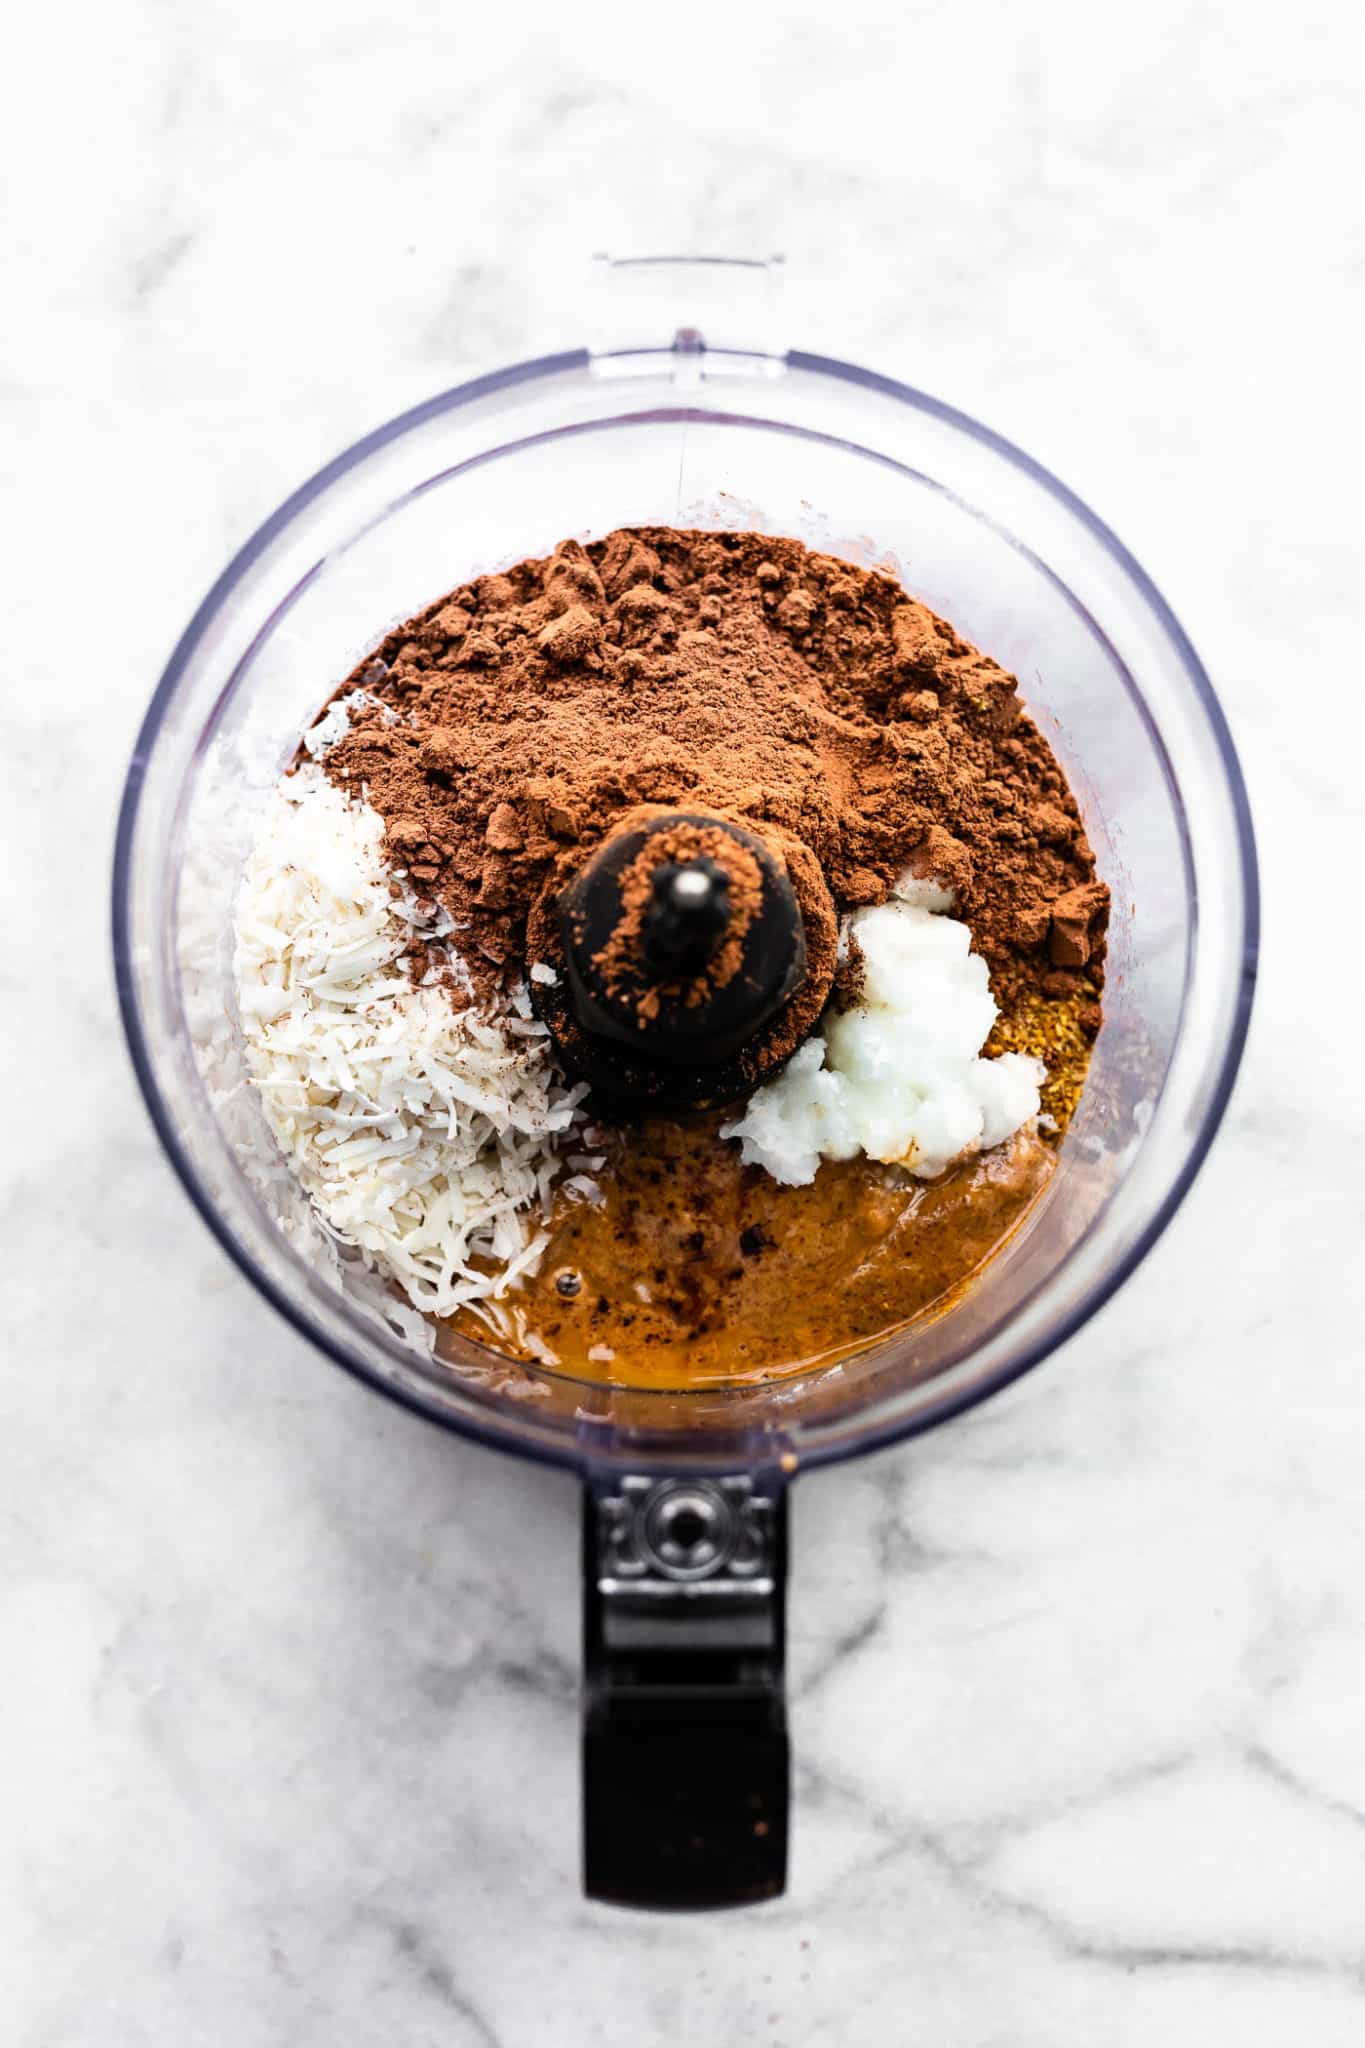 Overhead image of ingredients in a food processor. Cocoa powder, coconut, and nut butter.